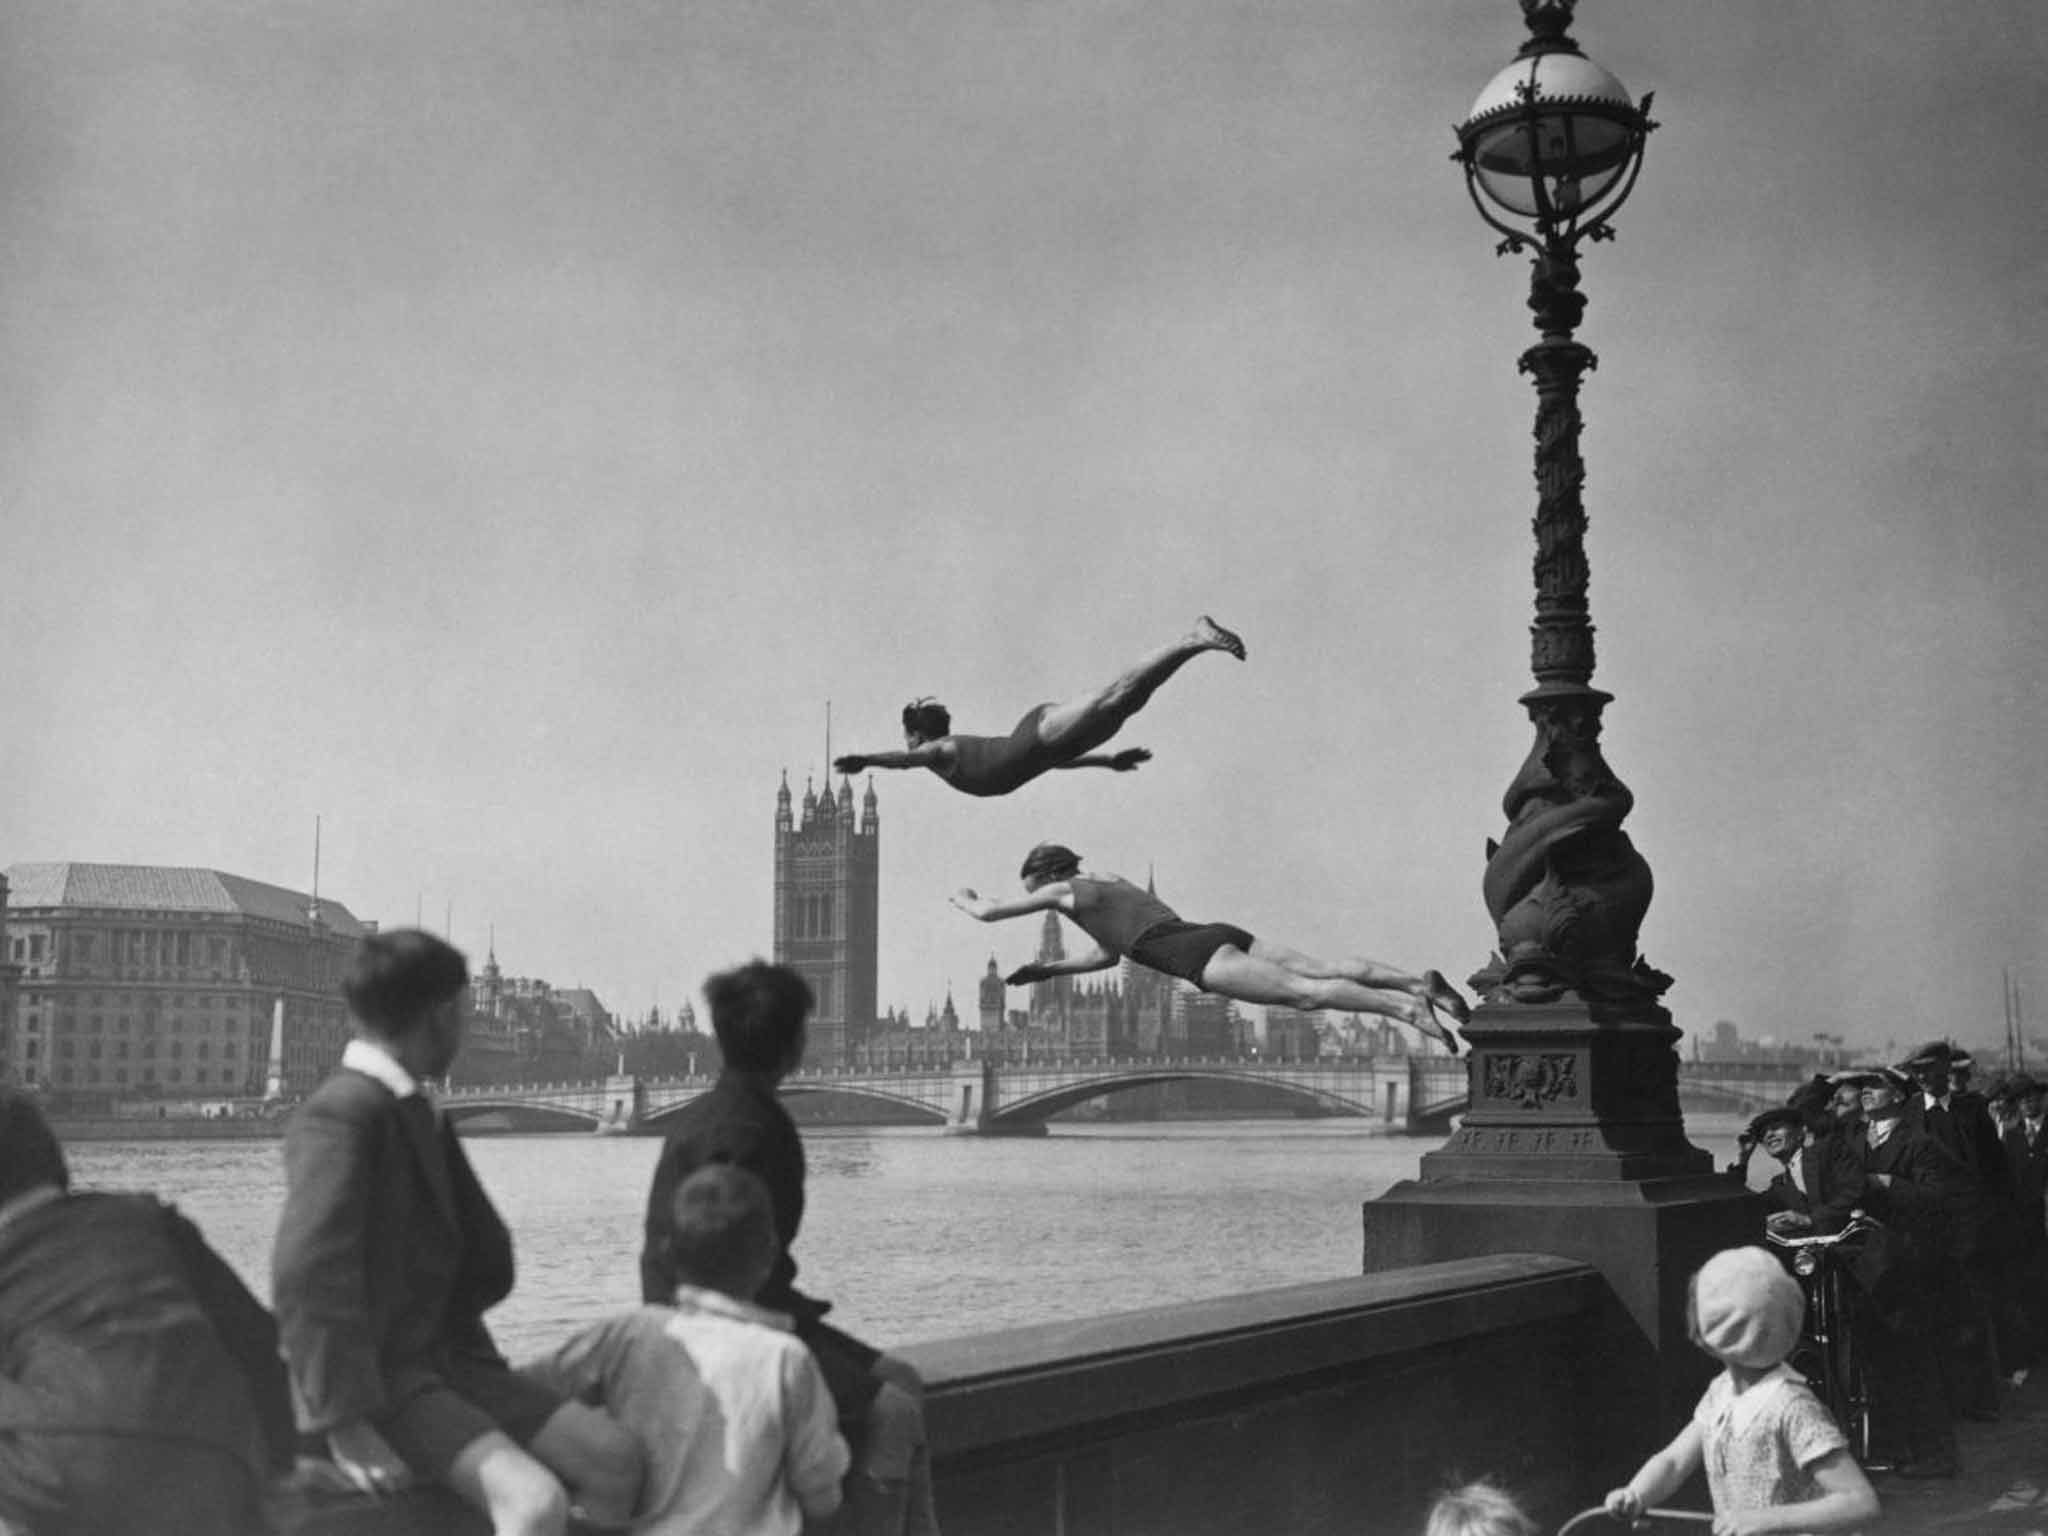 A capital idea: two divers jumping off the Embankment into the River Thames in London, near Westminster Bridge